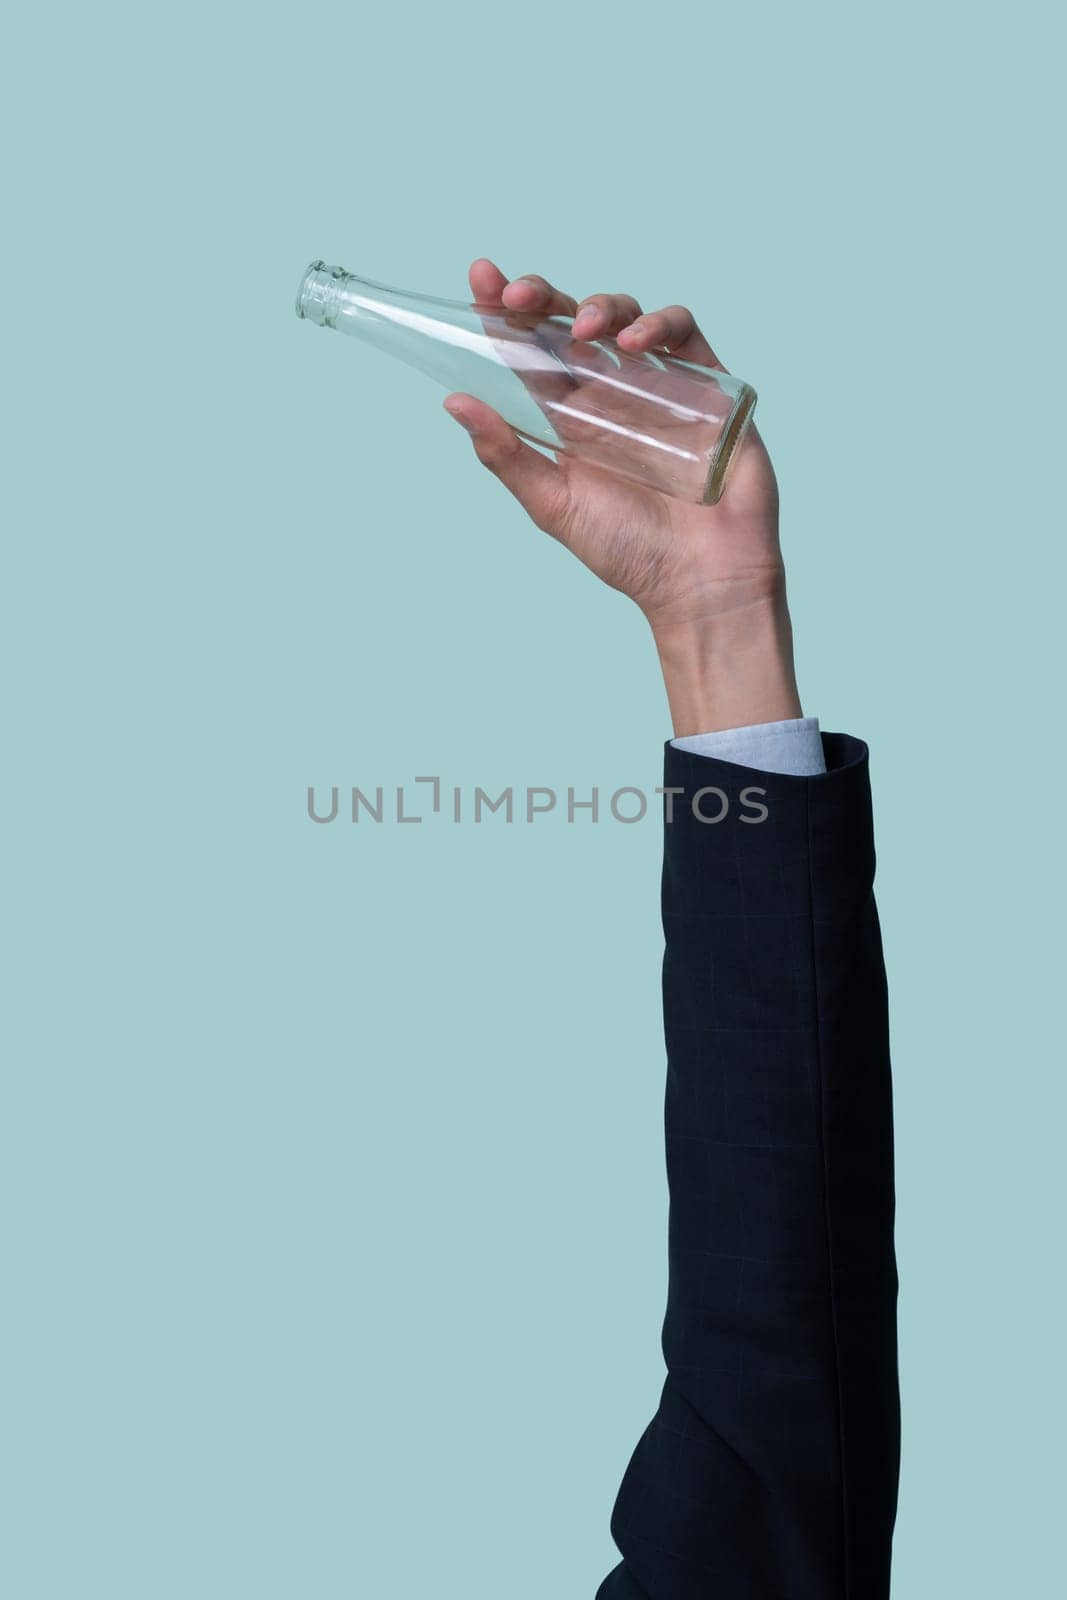 Businessman's hand holding glass bottle on isolated background. Eco-business recycle waste policy in corporate responsibility. Reuse, reduce and recycle for sustainability environment. Quaint